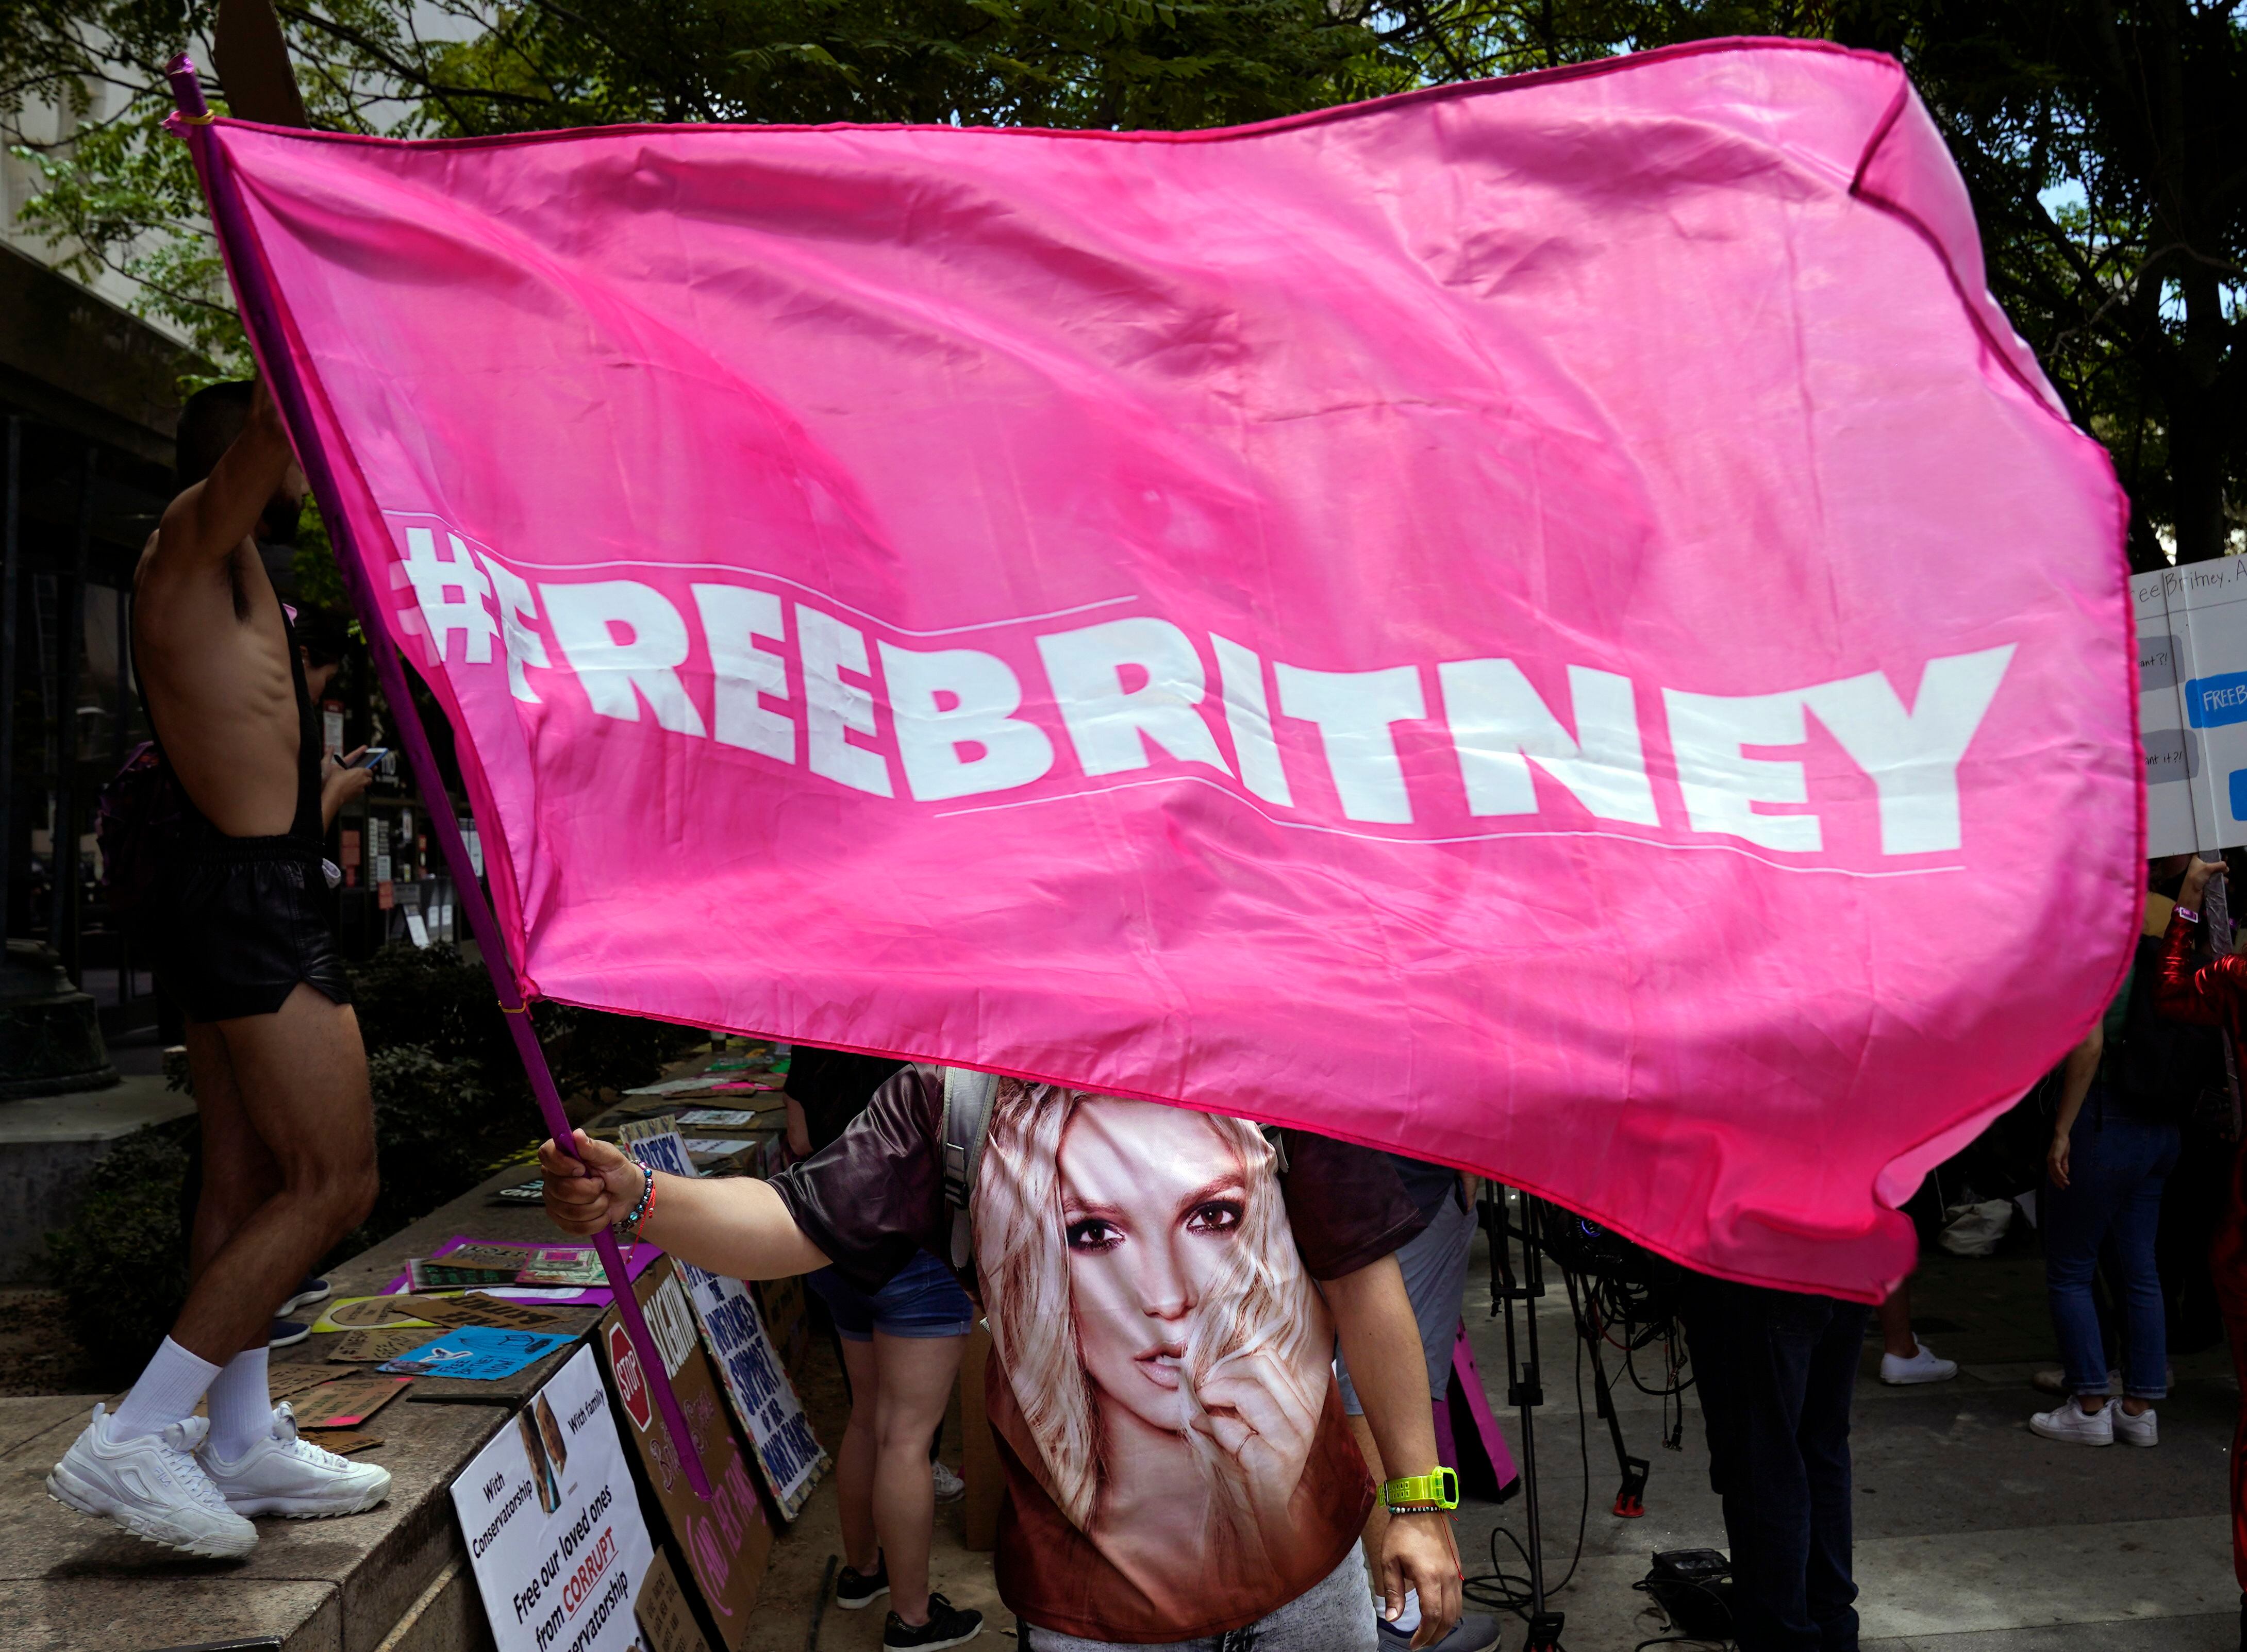 Britney Spears’ new lawyer files to remove father’s control